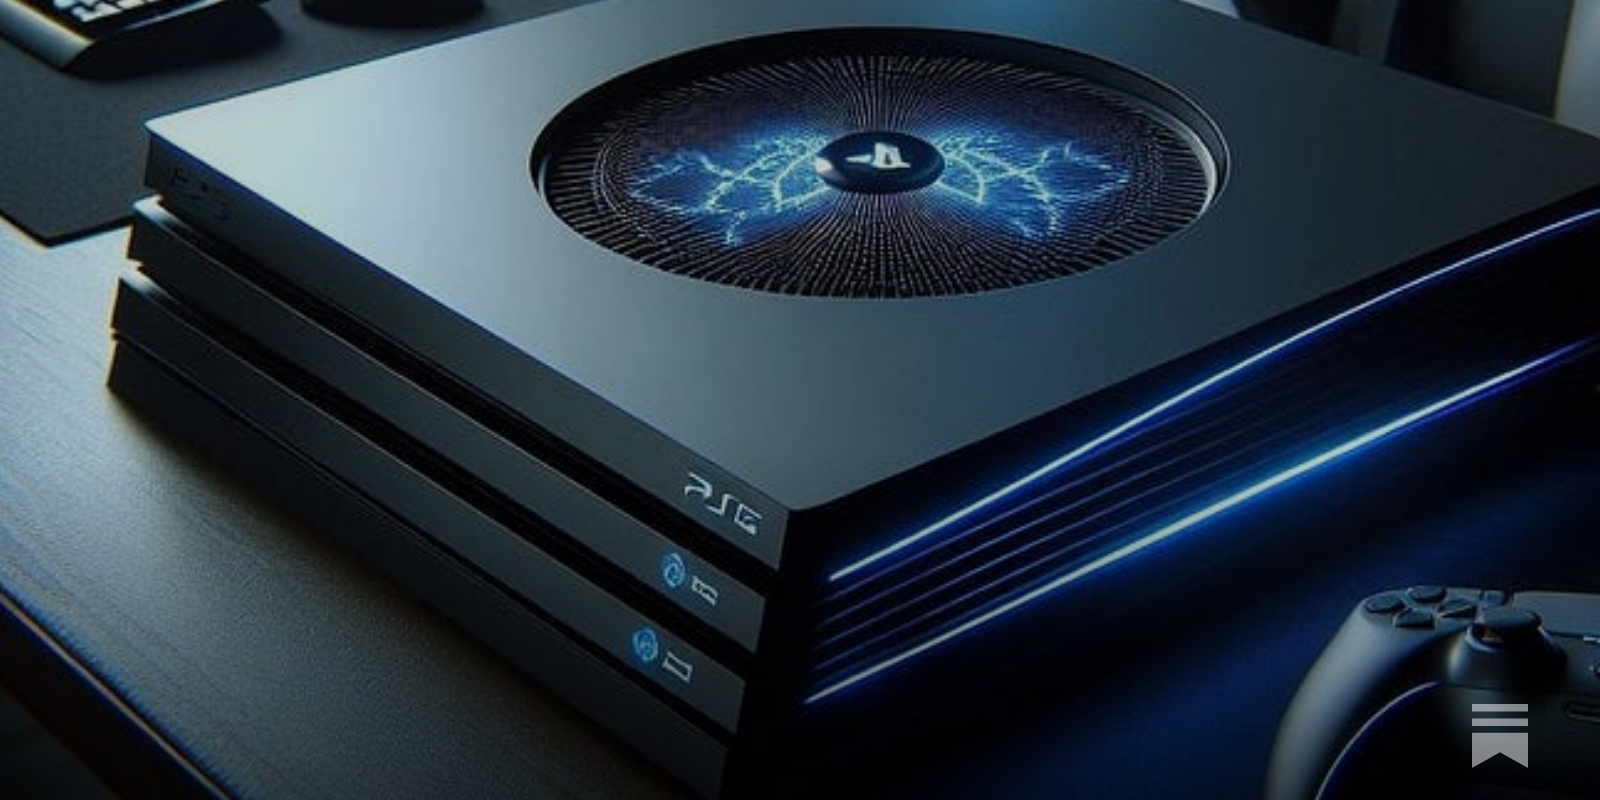 PS5 Pro: Release date, price, specs and more rumors - CNET